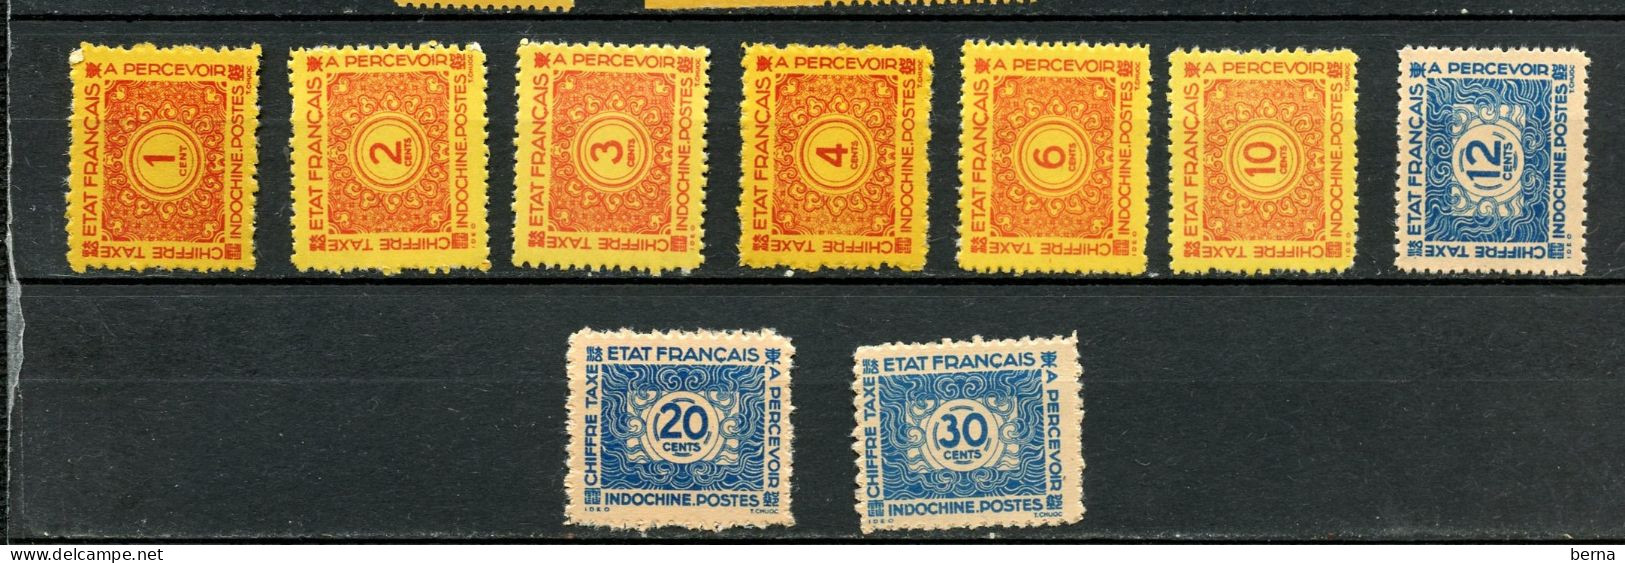 INDOCHINE TAXE 75/83 LUXE NEUF SANS CHARNIERE - Postage Due